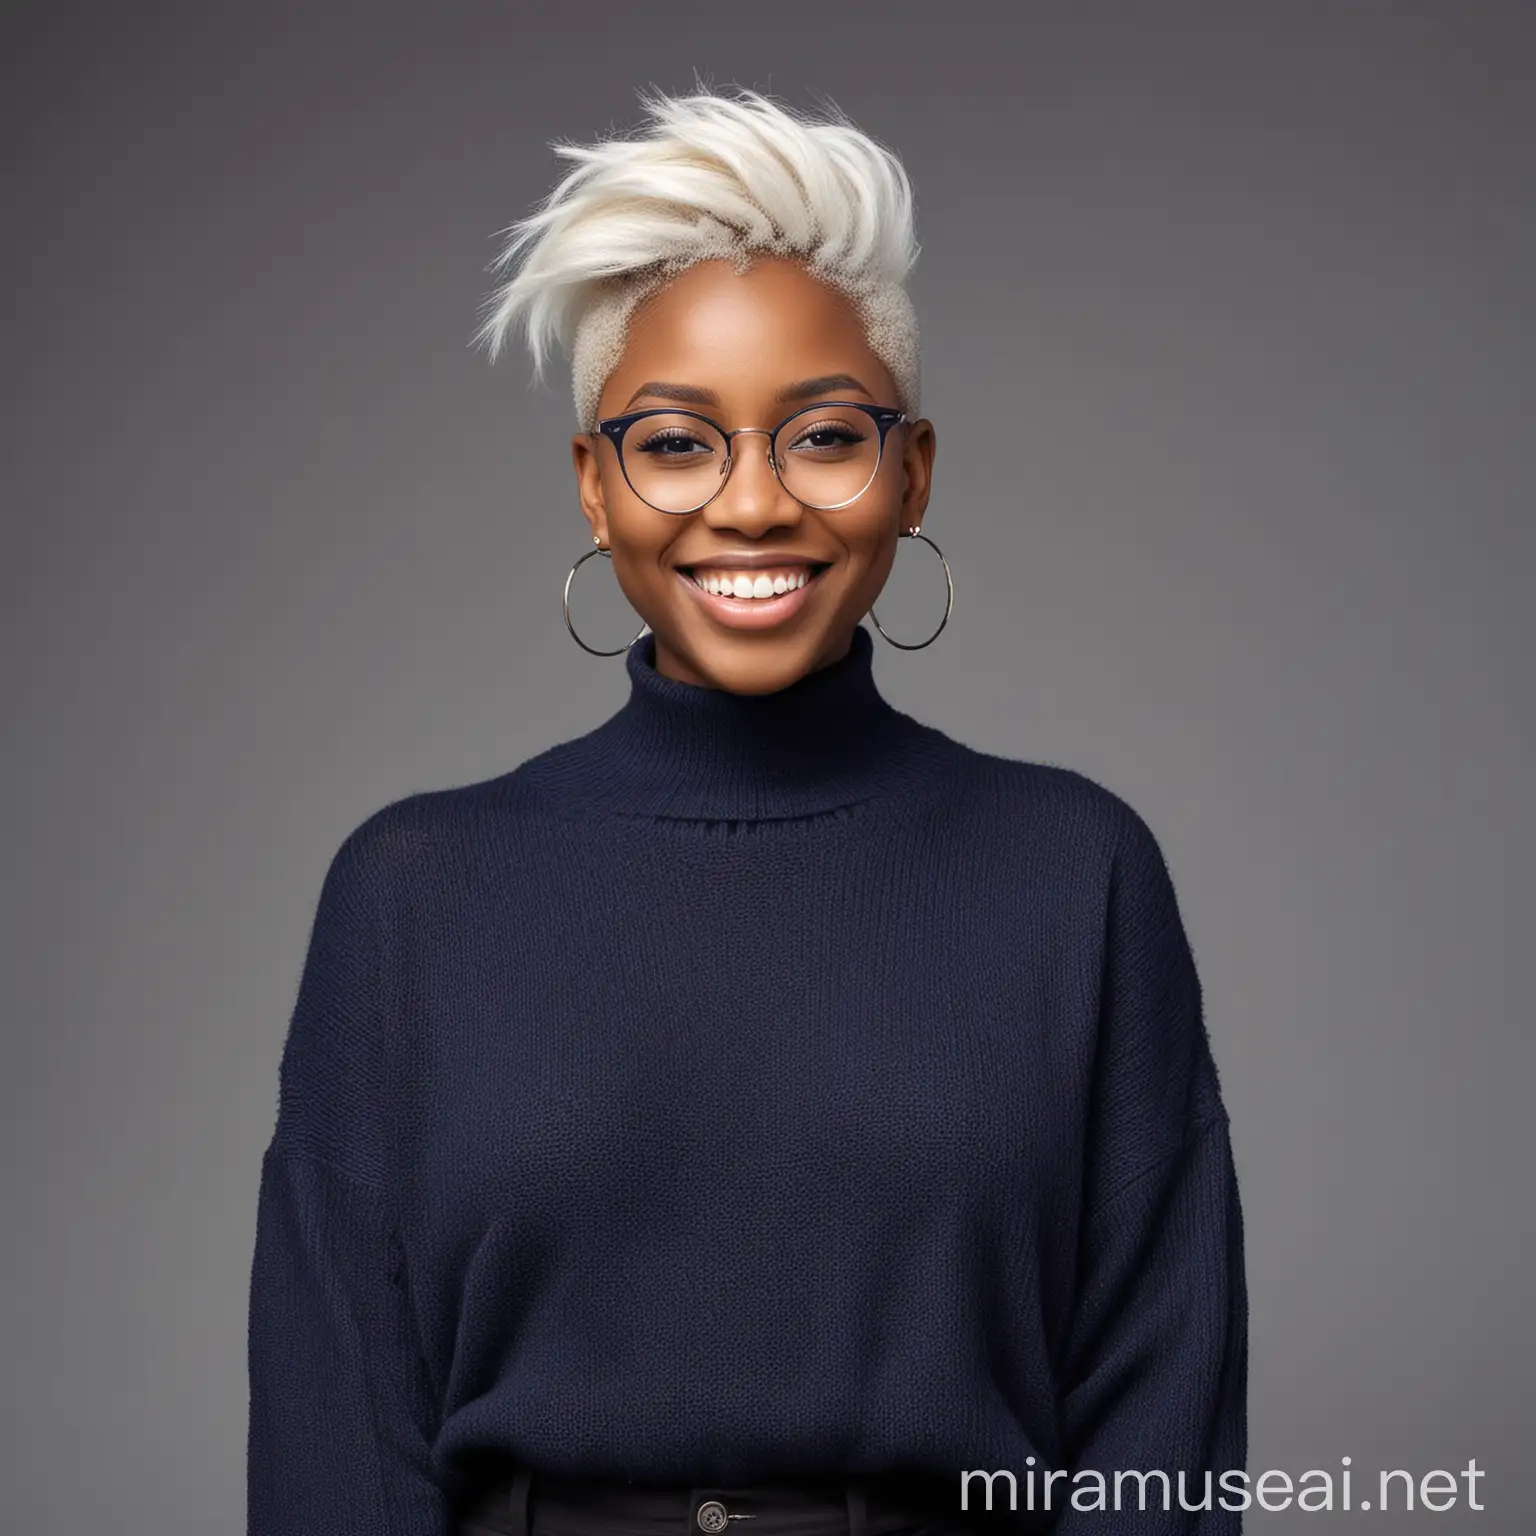 Stylish Nigerian Woman in Blue Sweater with Undercut Hair and Glasses Smiling for Camera